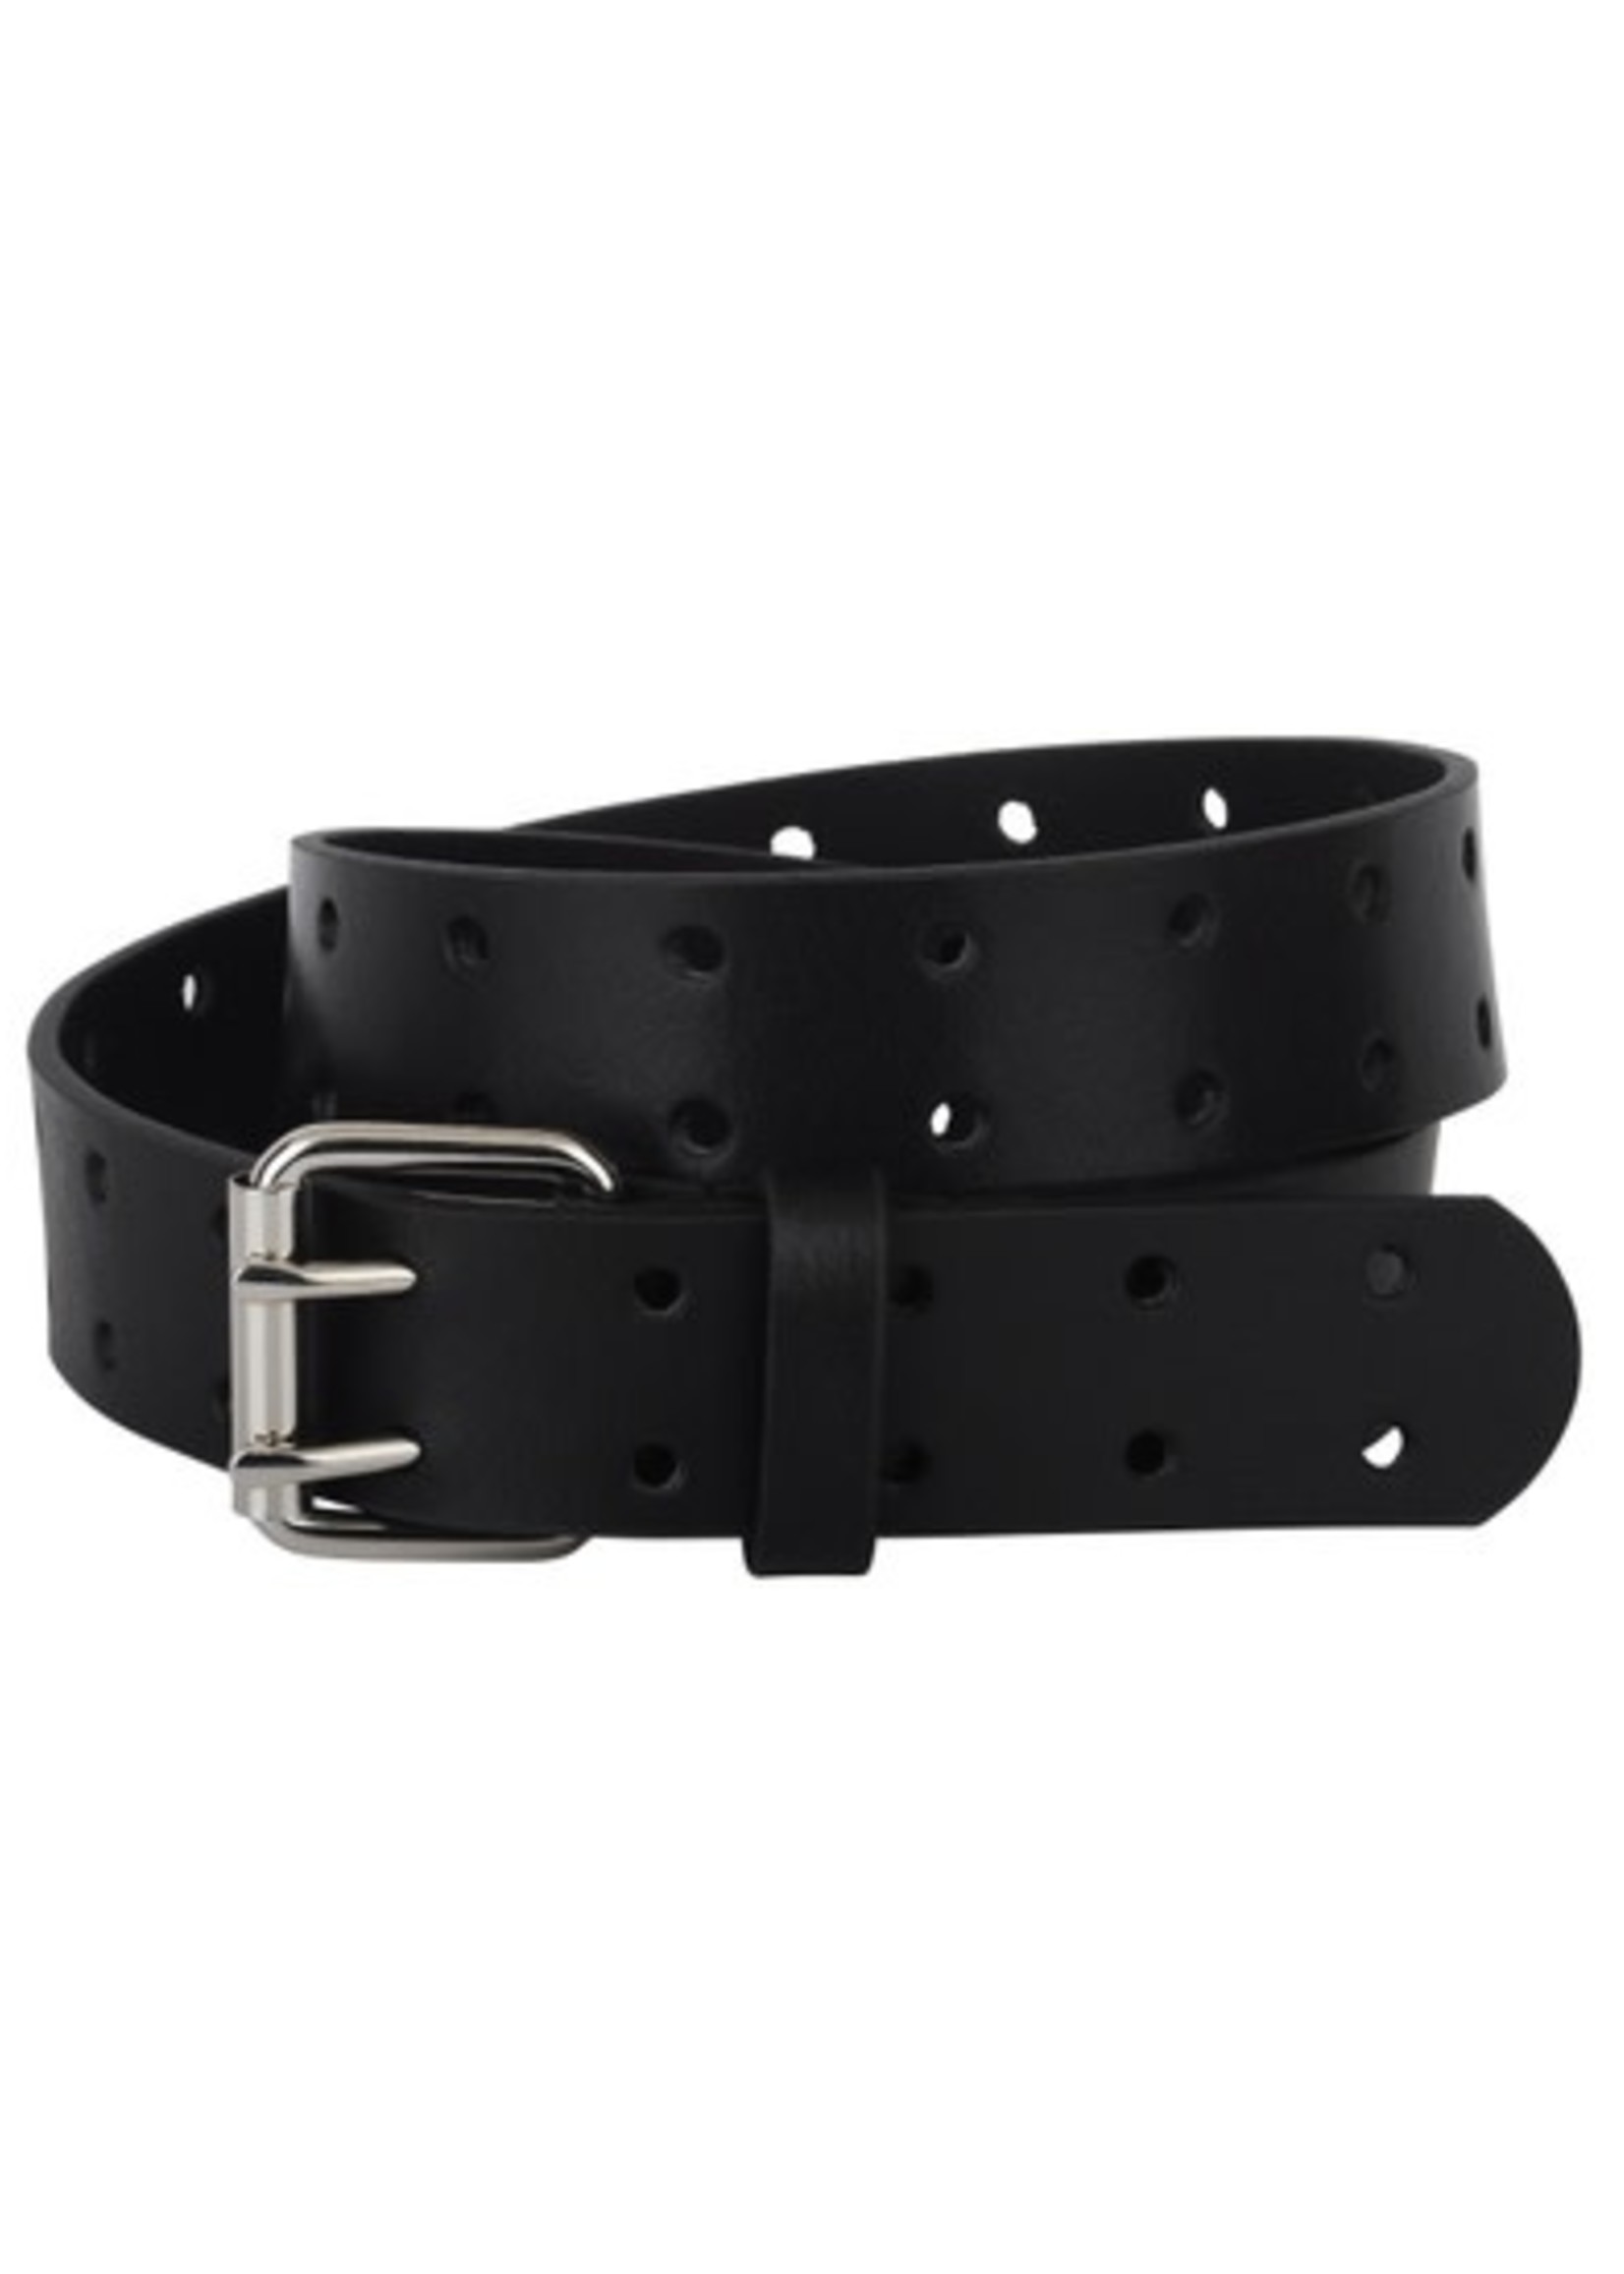 Most Wanted Double Prong Leather Belt